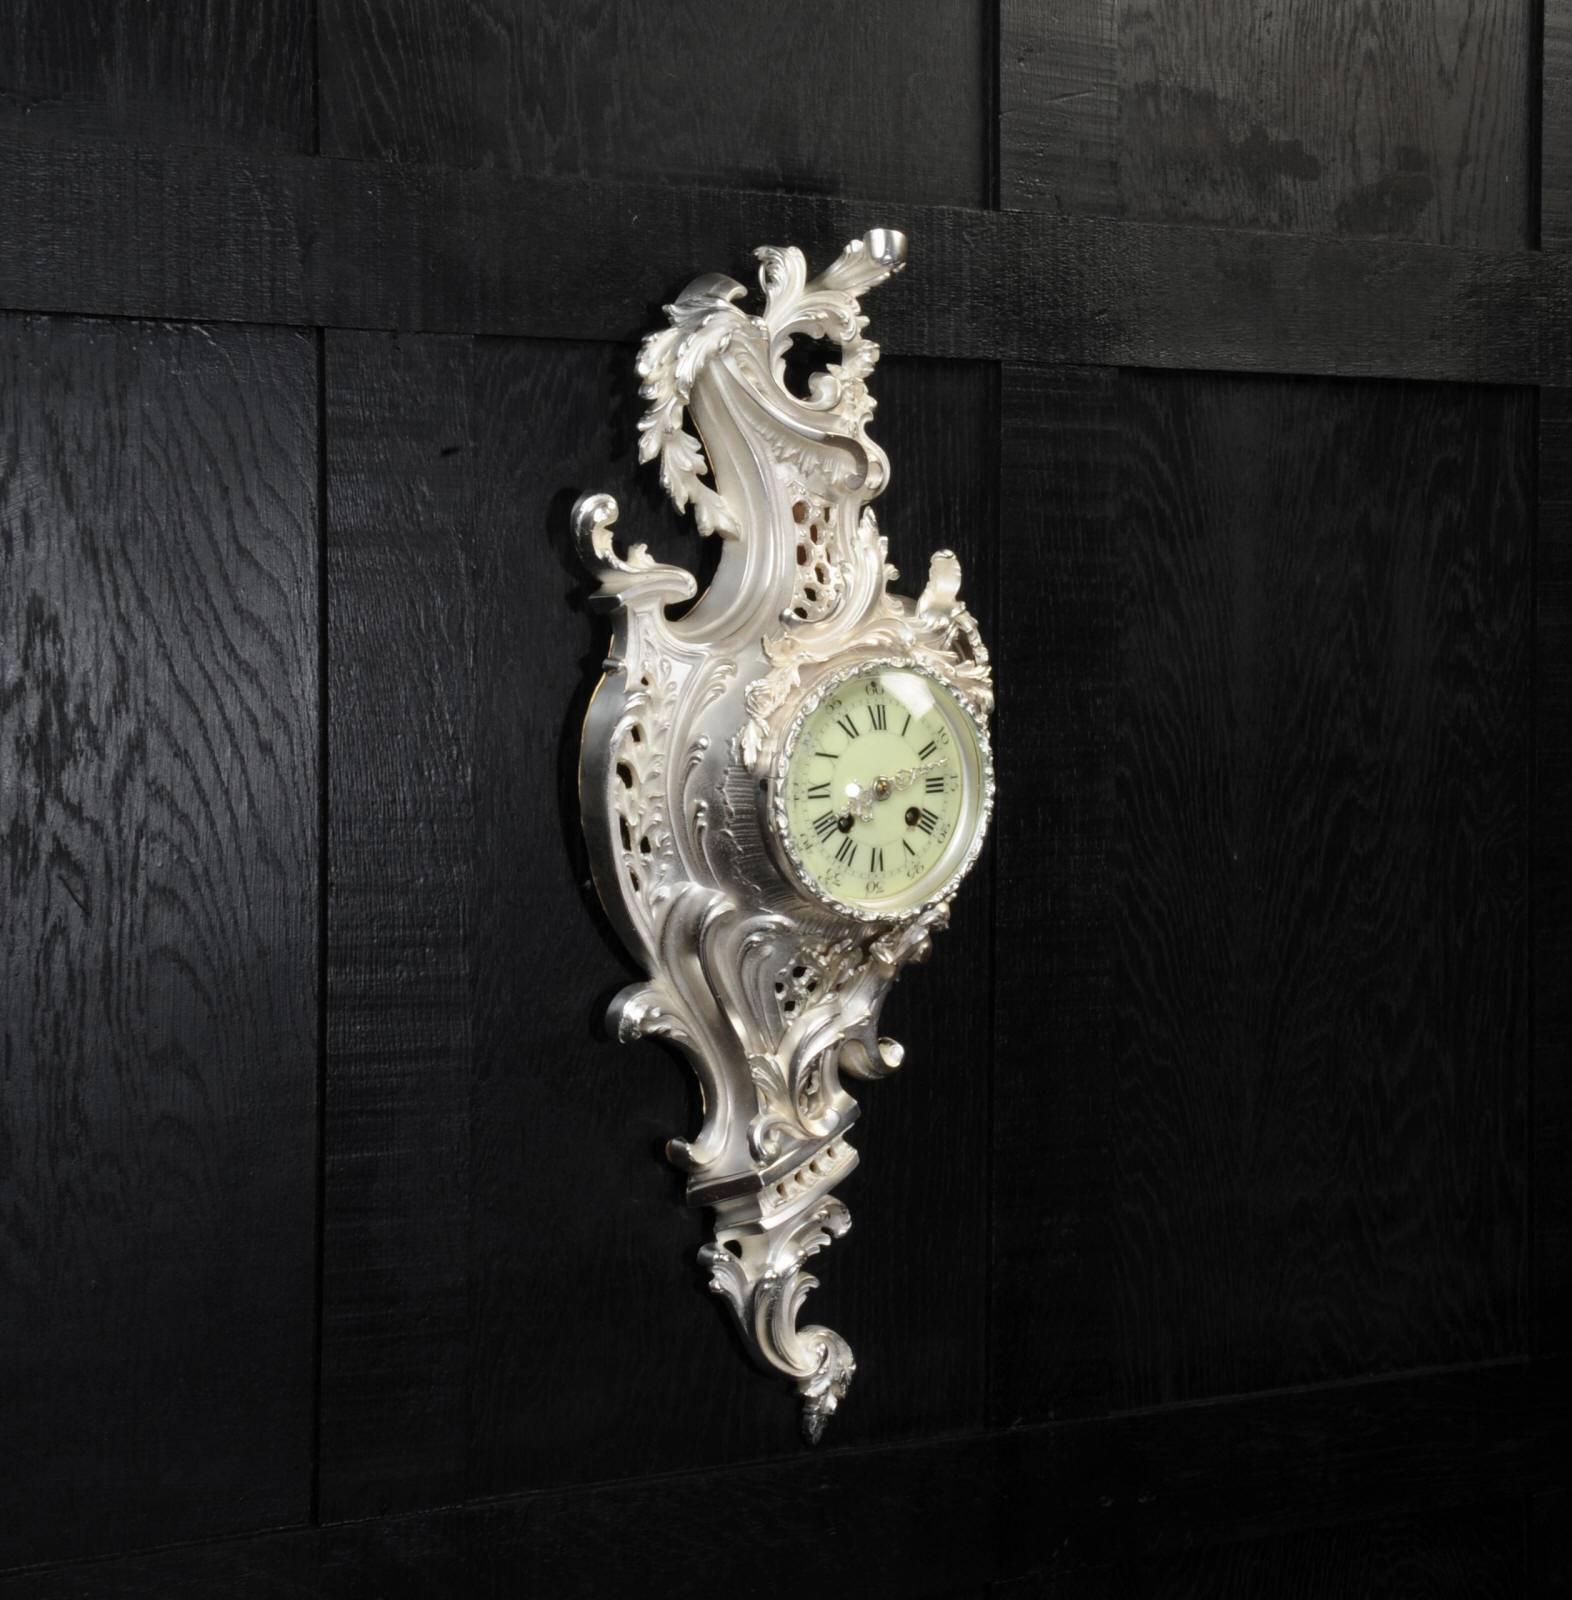 A rare and very decorative silver plated Antique French Rococo wall clock. Stunning asymmetric design with scrolling foliage and floral swags. It is finely modelled in silver plated bronze, polished and matted, a beautiful and unusual variation on